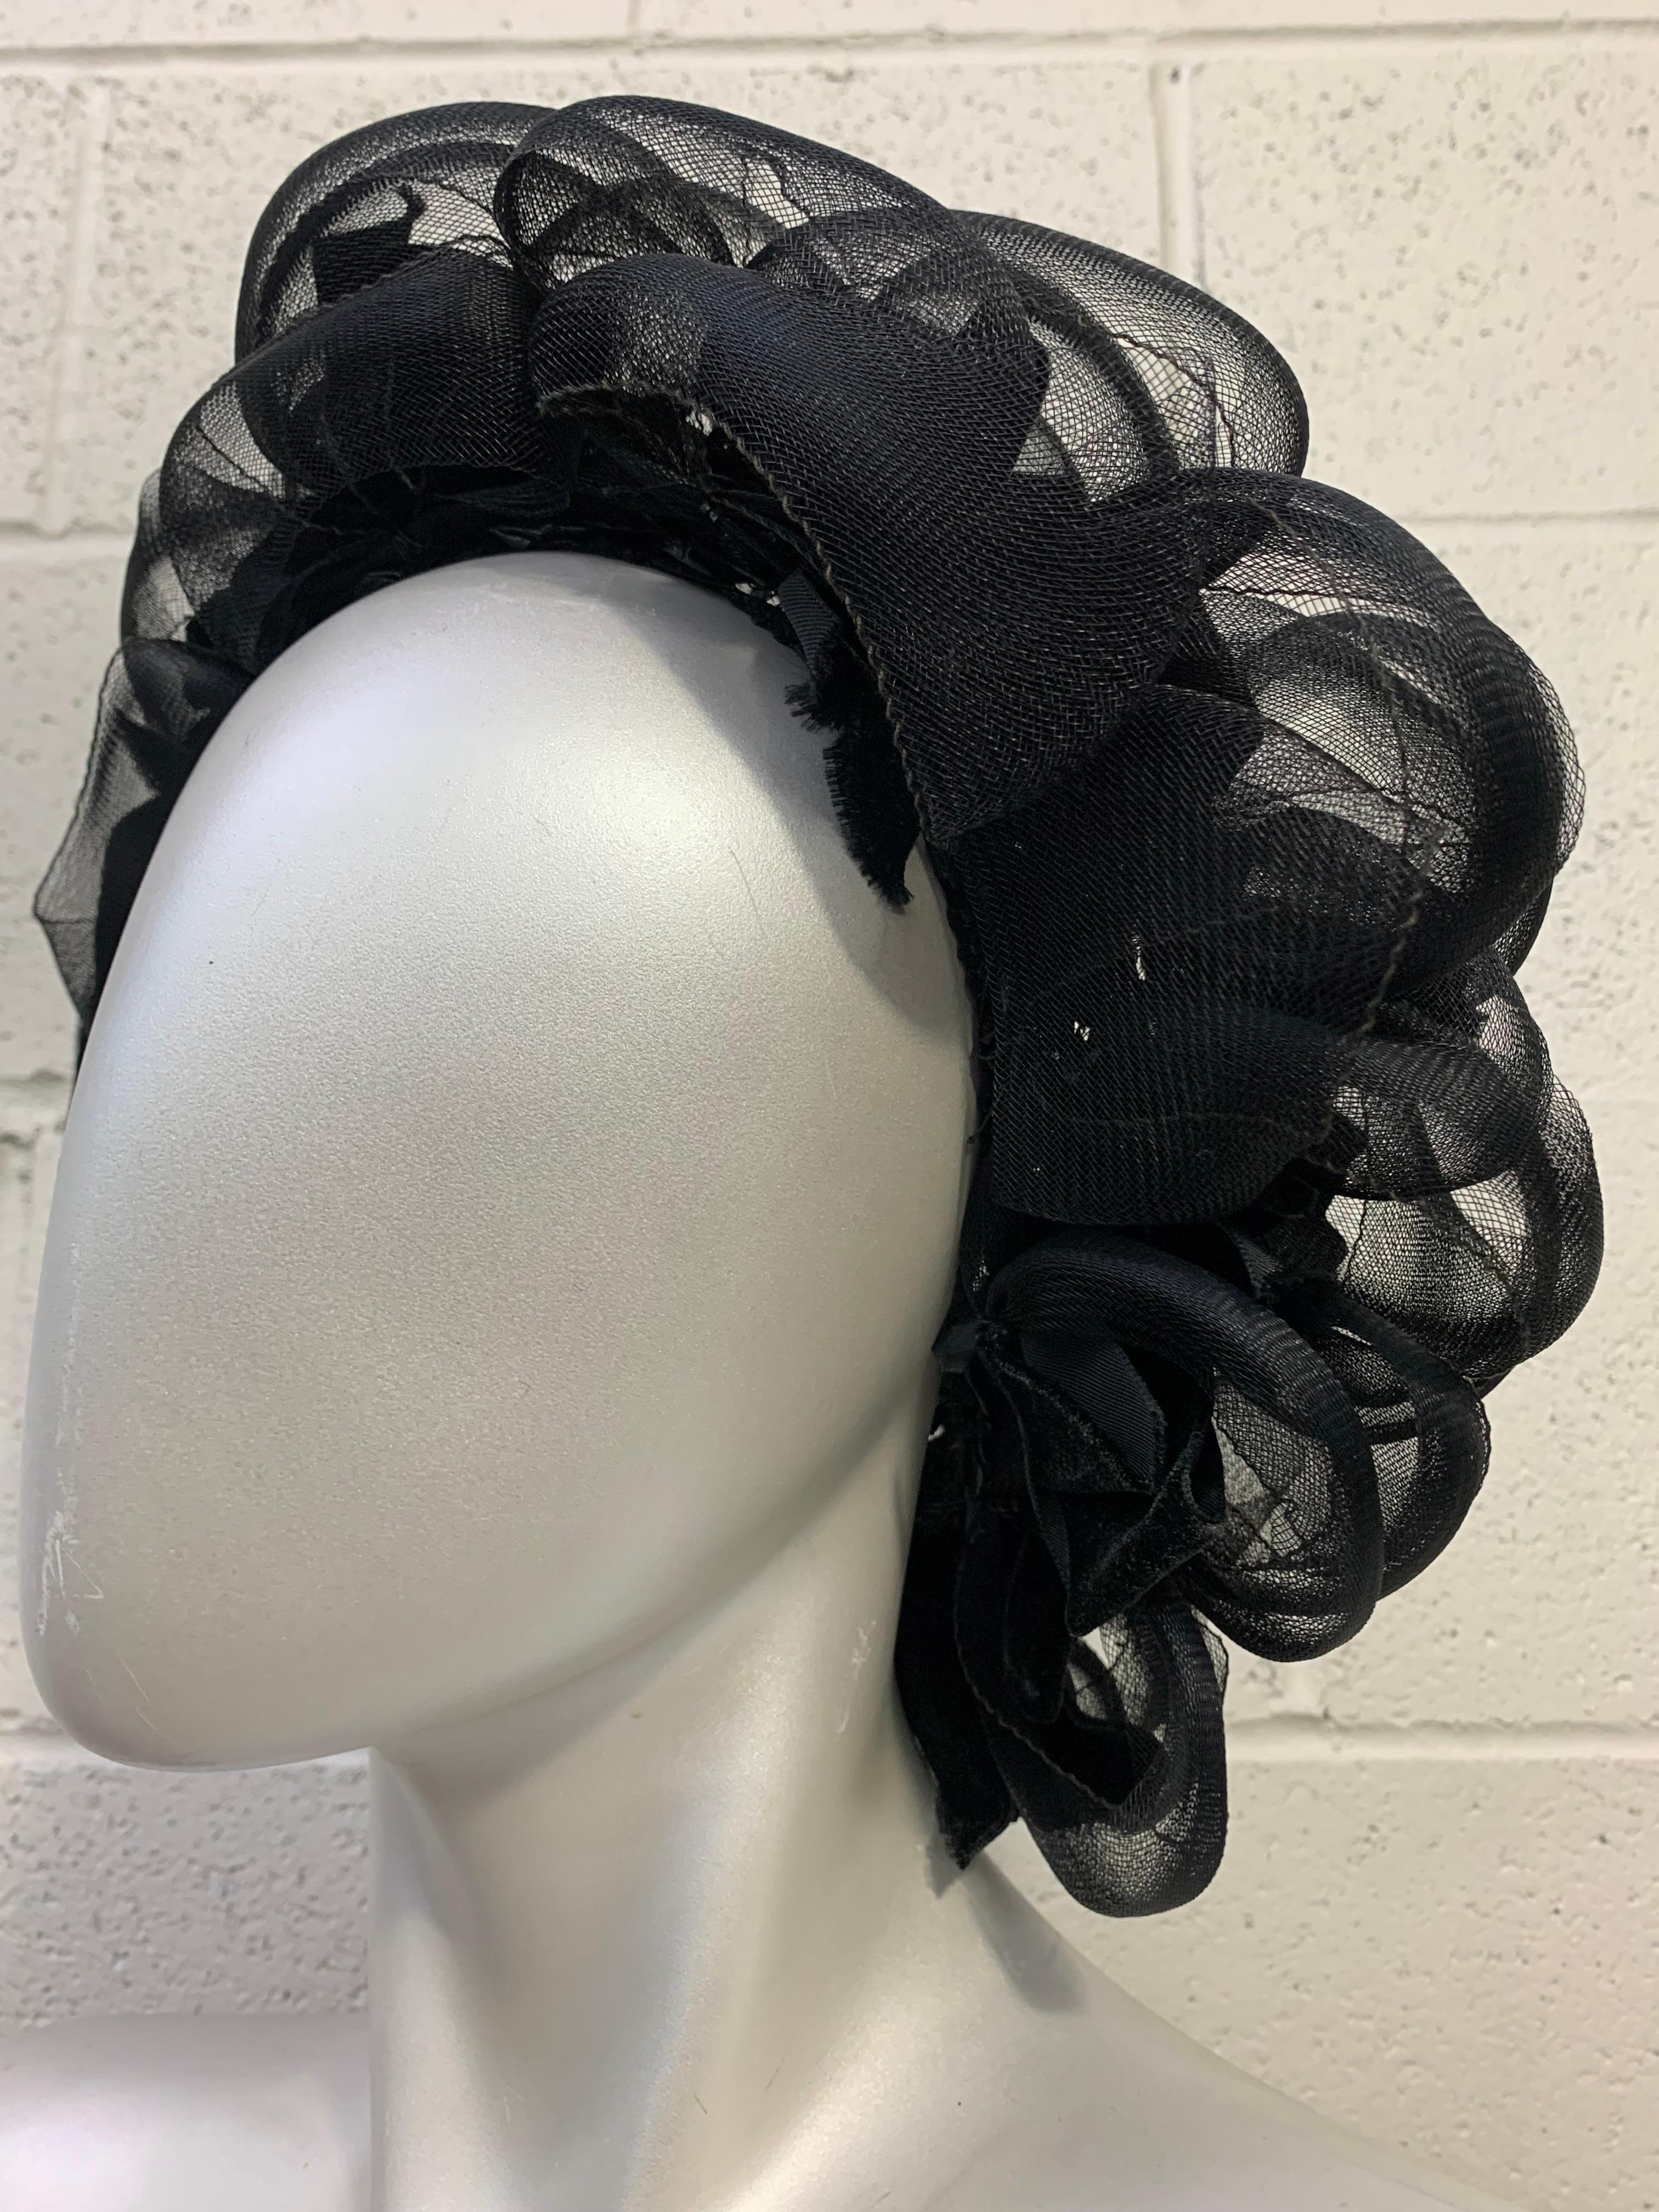  1960s Christian Dior Black Horsehair & Net Dramatic Looped Cocktail Hat with Fitted Net Cap Crown:  This campy statement  from Christian Dior Chapeaux would fit right in the club scene from Sweet Charity. One size fits all. 